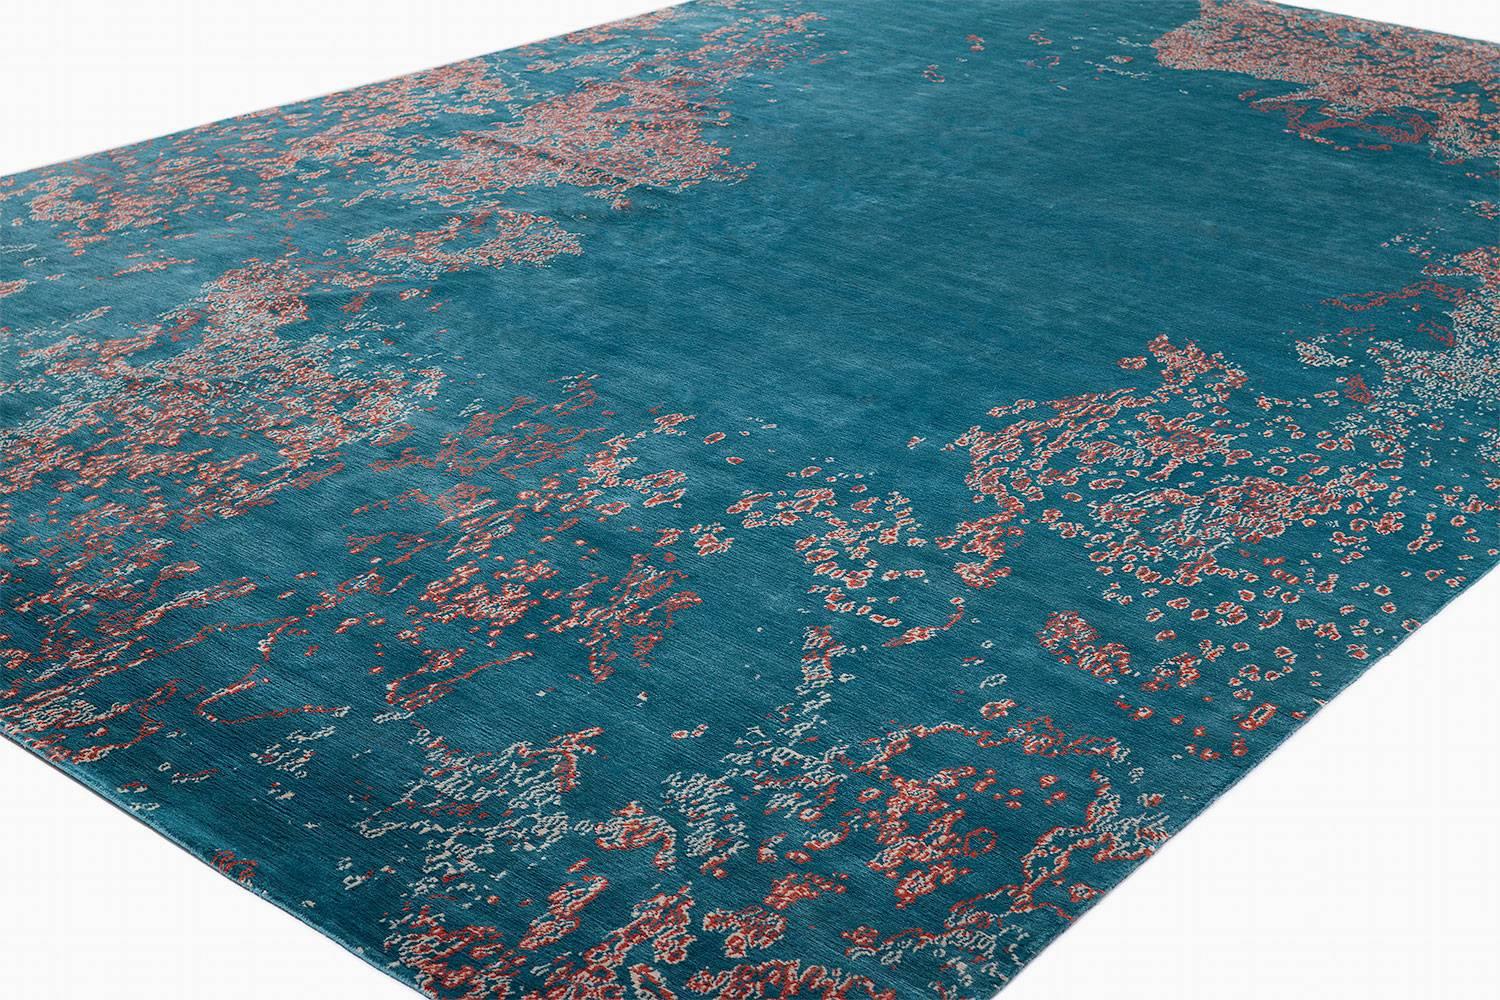 This couture carpet design by Joseph Carini was loosely inspired by his love of coral reefs. We colored this carpet in a sumptuous aqua blue with coral red and off-white accents, giving a sense infinite space. Woven with the highest quality silk